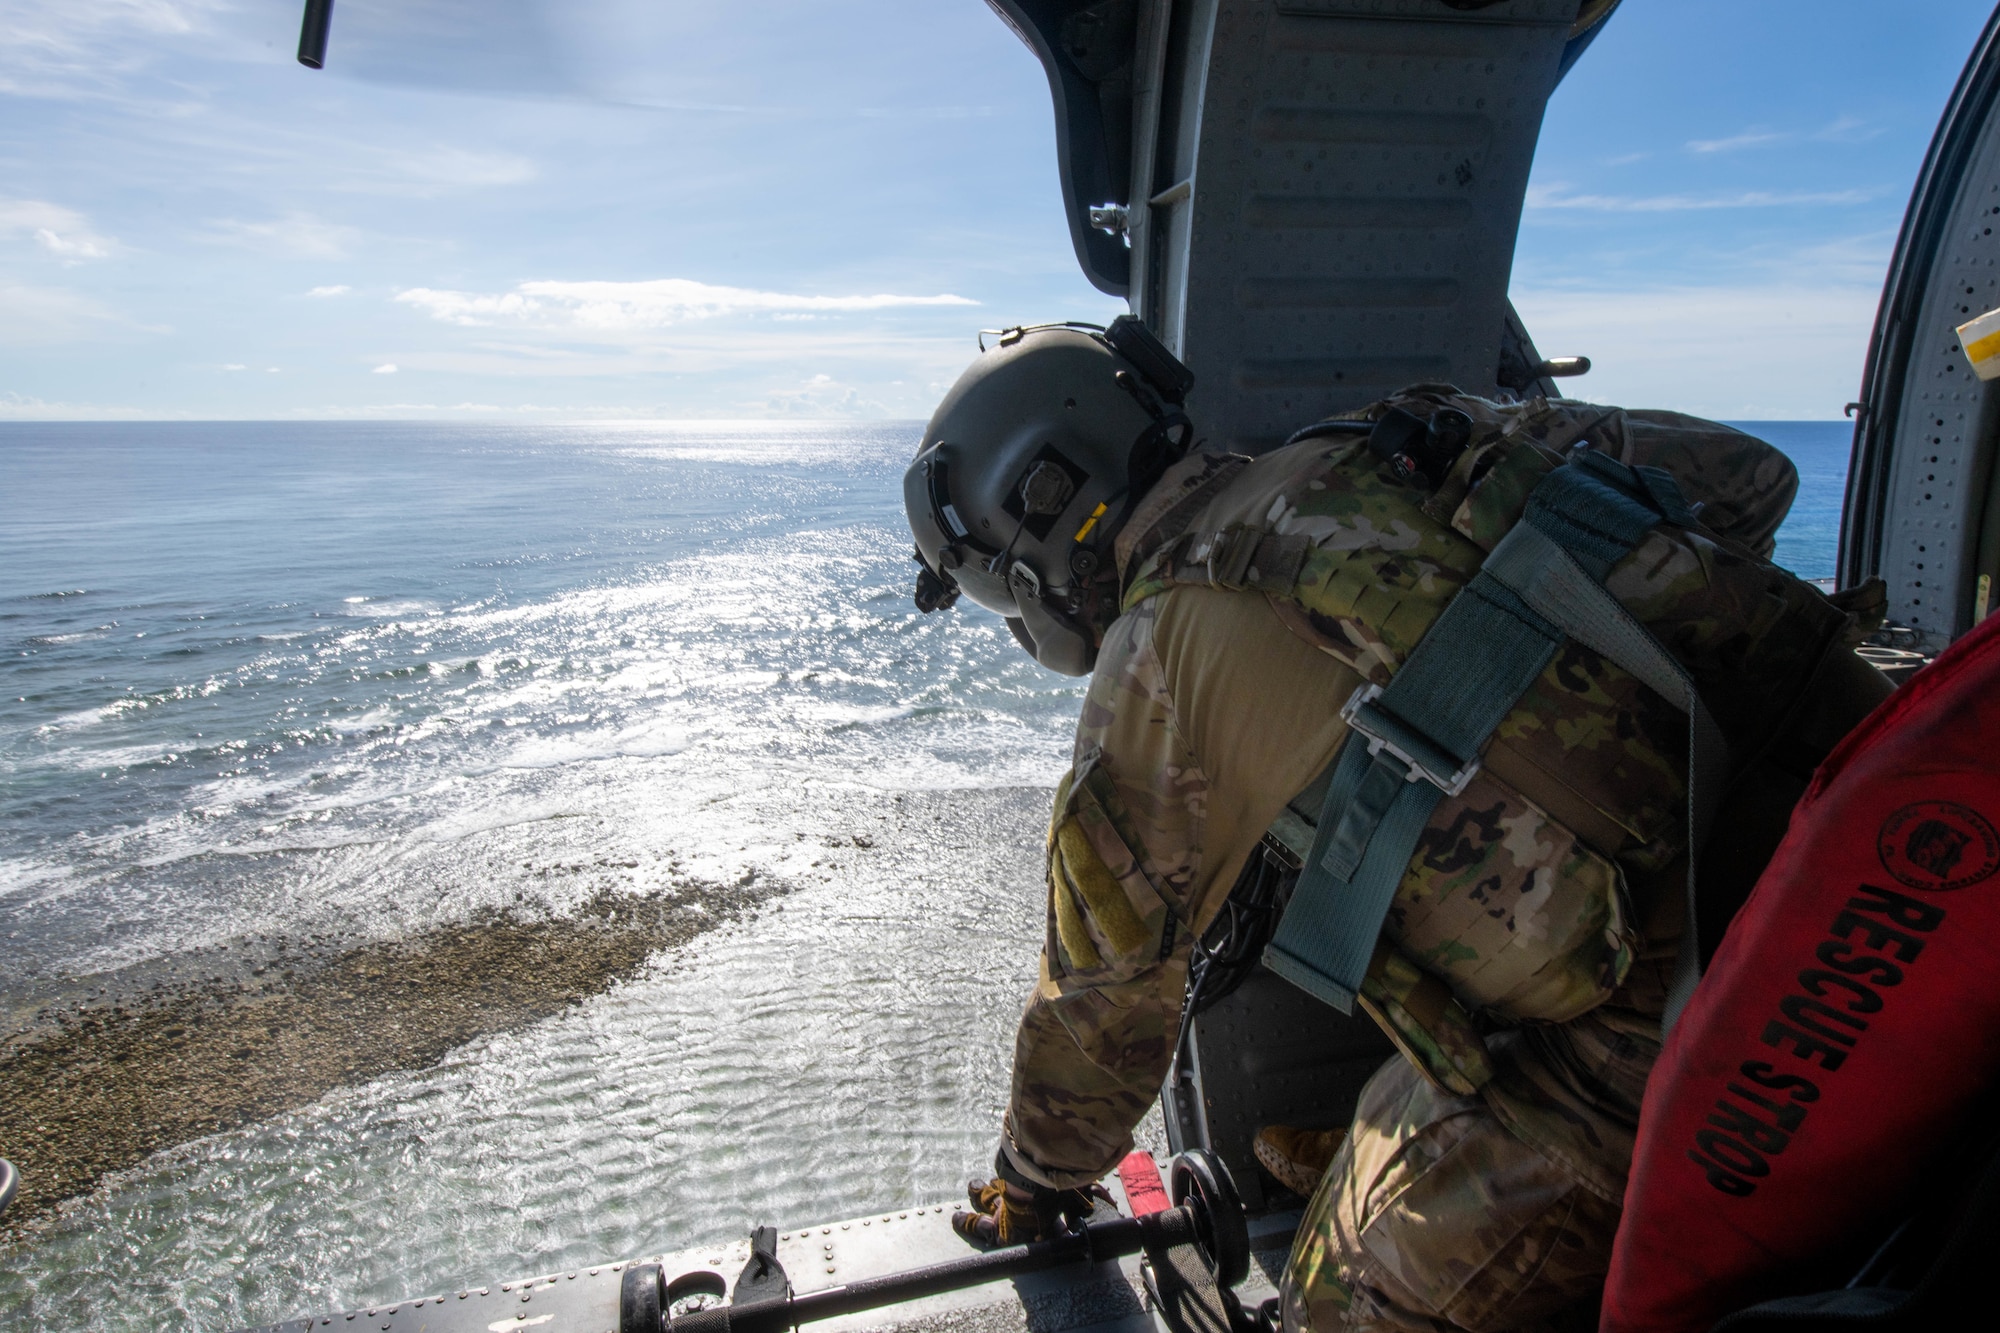 An Airman lets down a rope ladder from a hovering helicopter.